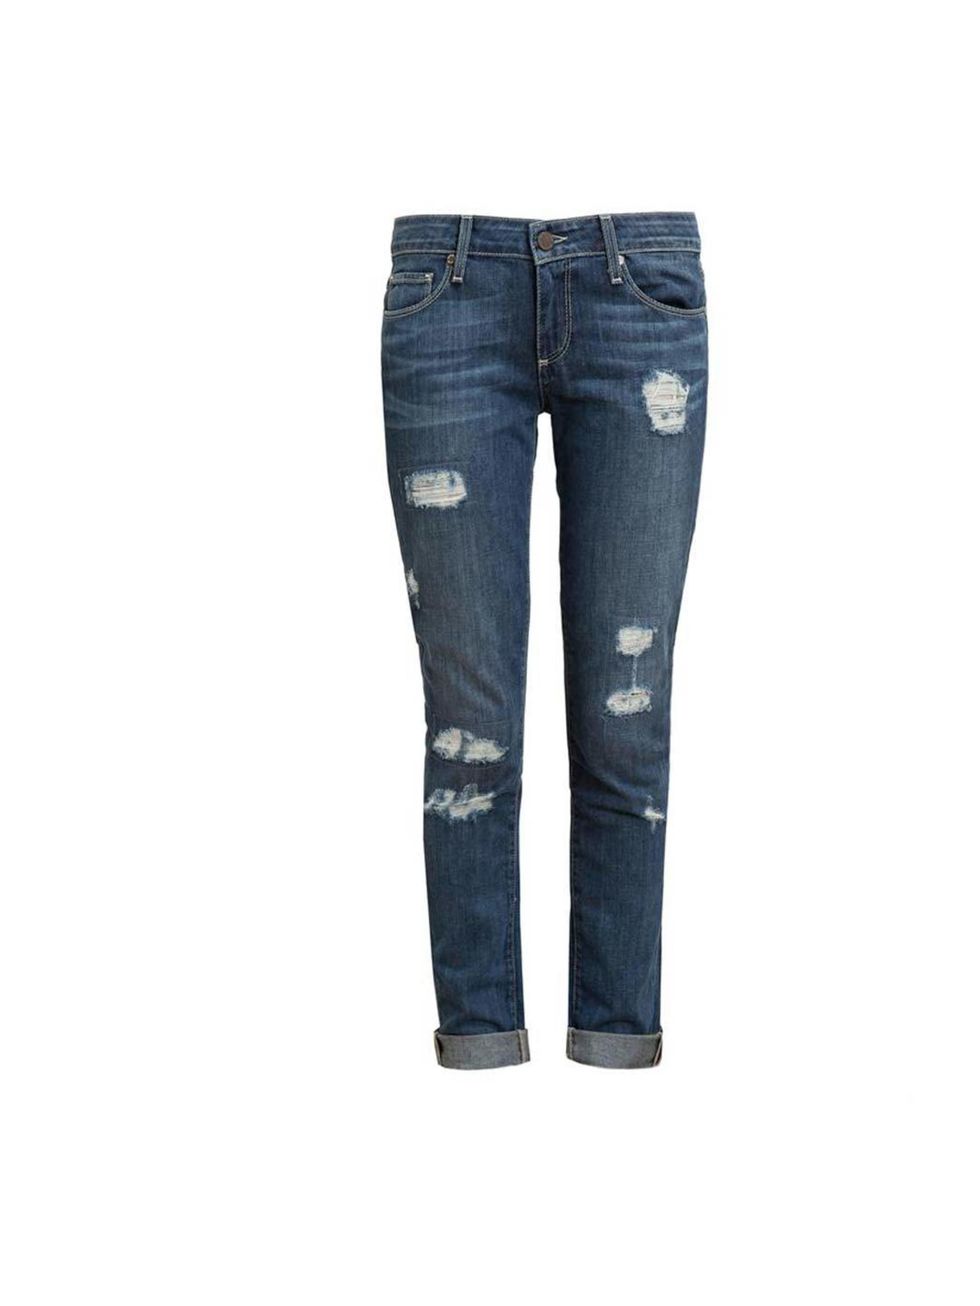 <p>A pair of jeans is always a safe bet.</p><p>These Paige denim are available at <a href="http://www.brownsfashion.com/product/018332710002/034/jimmy-jimmy-skinny-distressed-jeans">Browns</a>, £260</p>